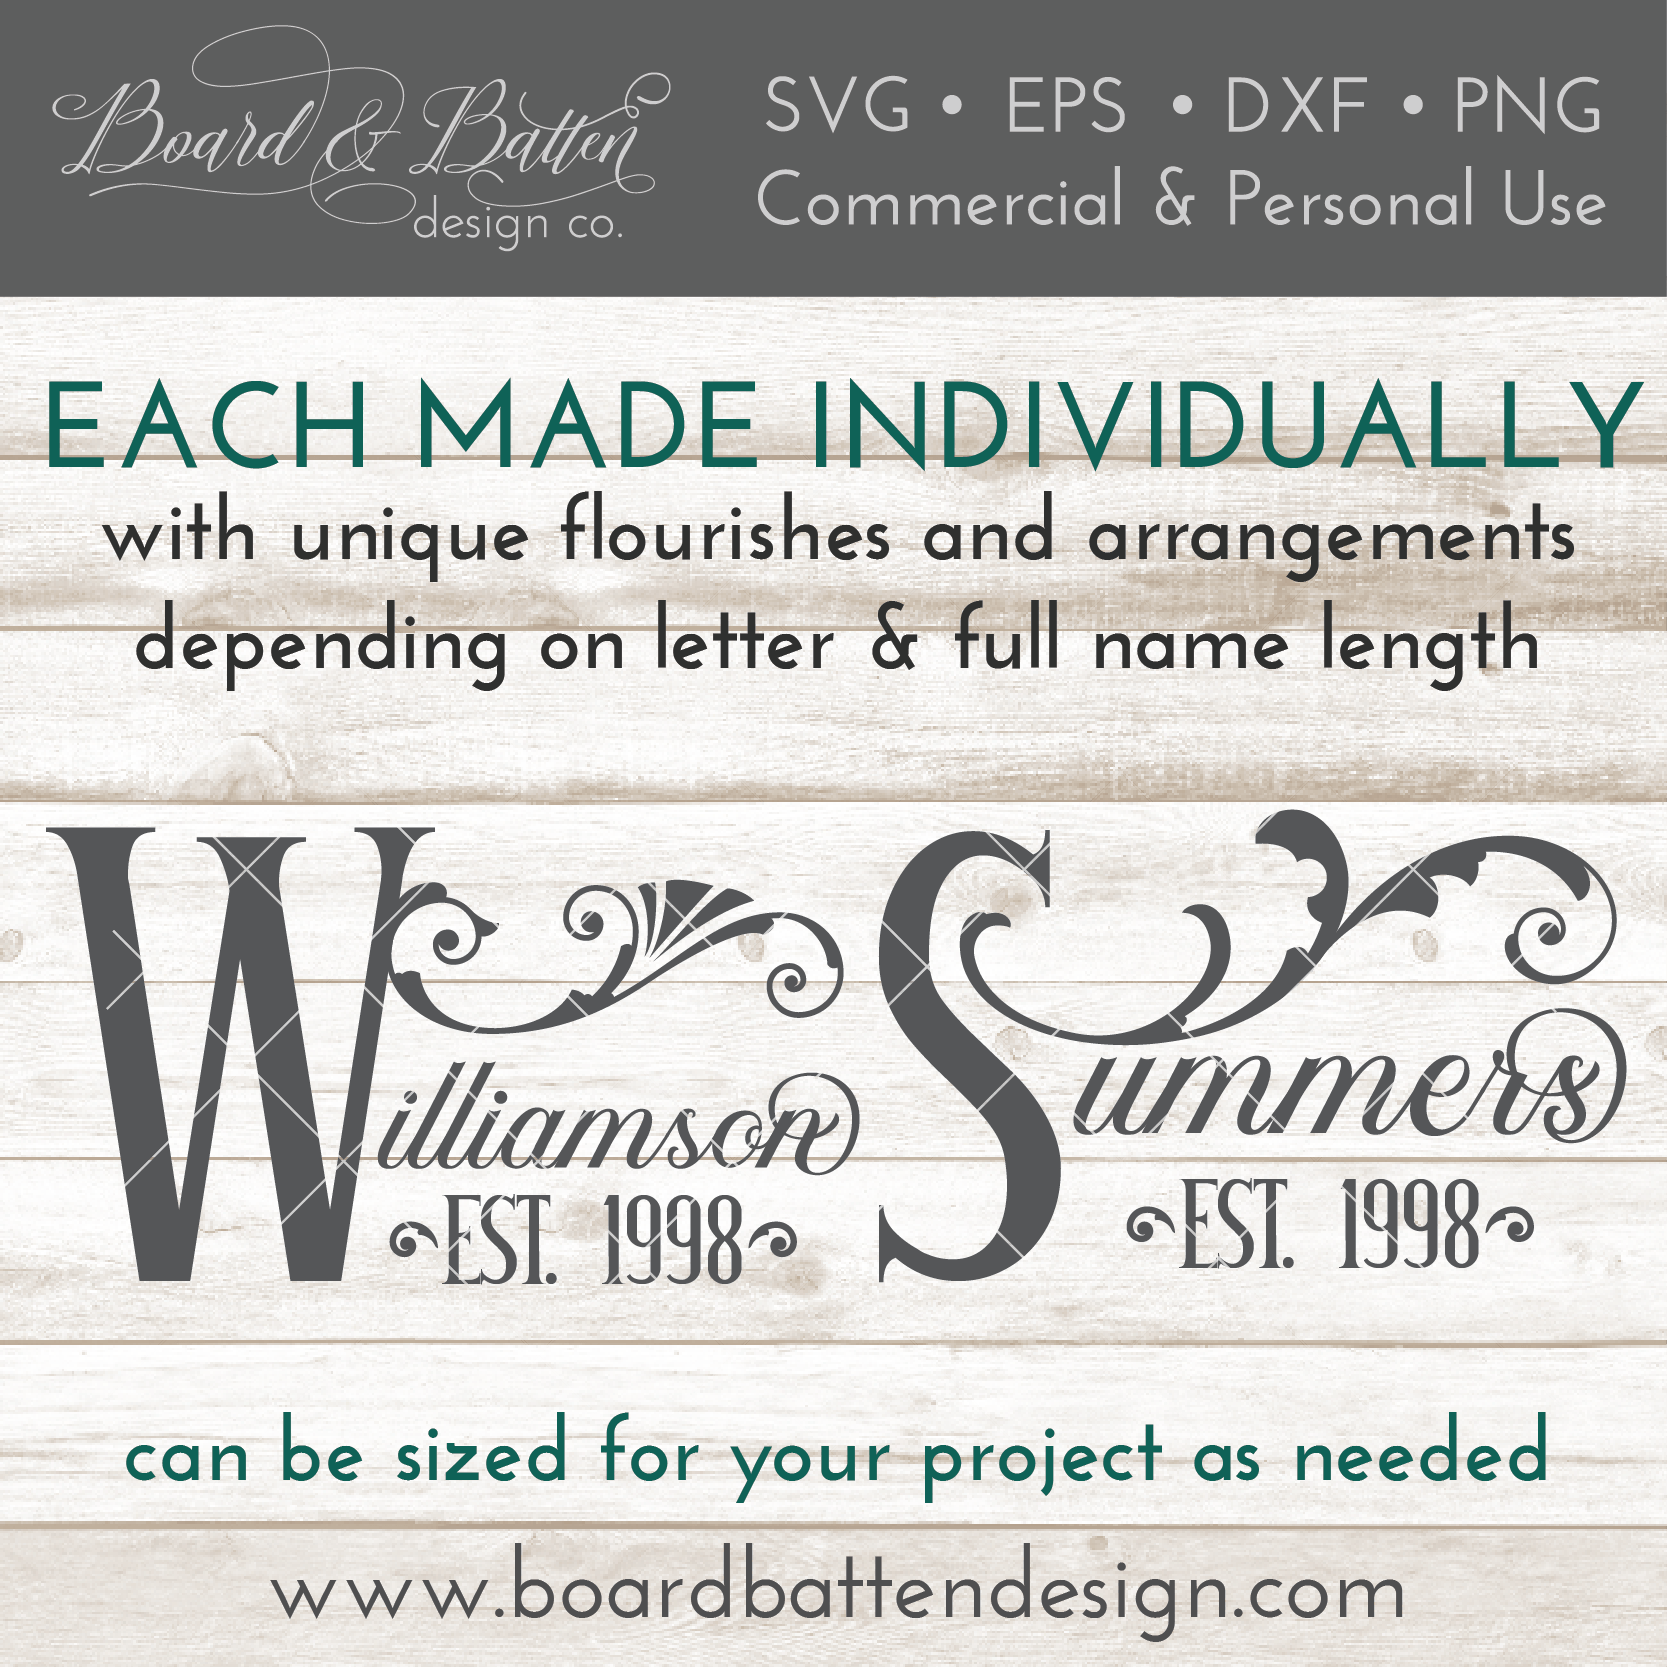 Download Personalized Victorian Style Last Name & Est Date SVG File ...